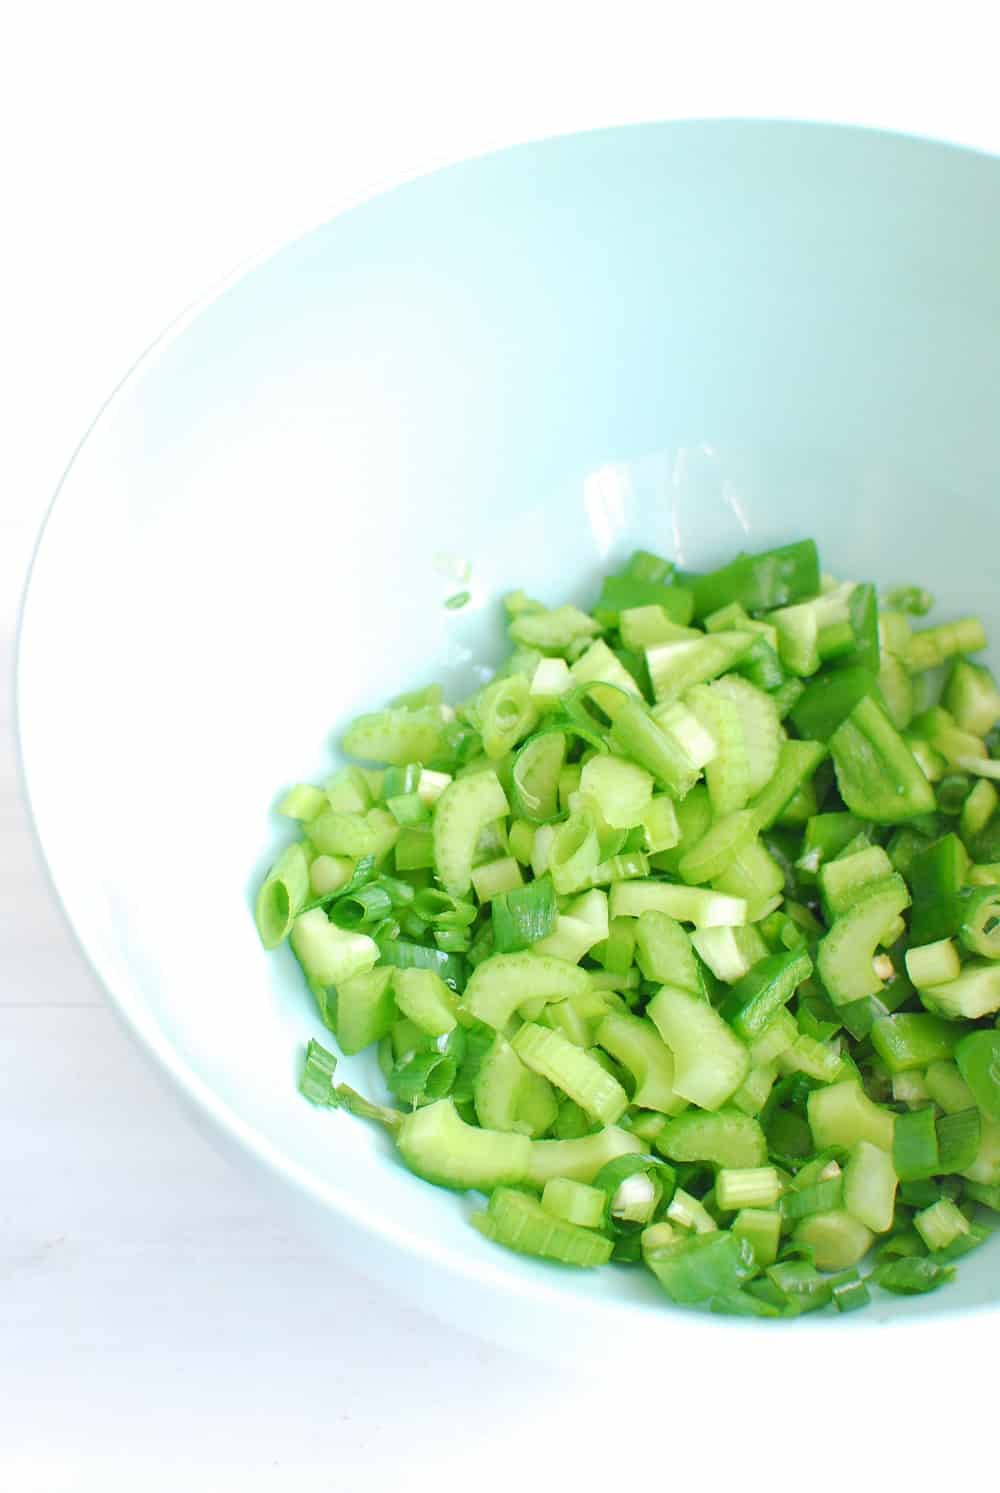 Mixing bowl full of chopped peppers and green onions